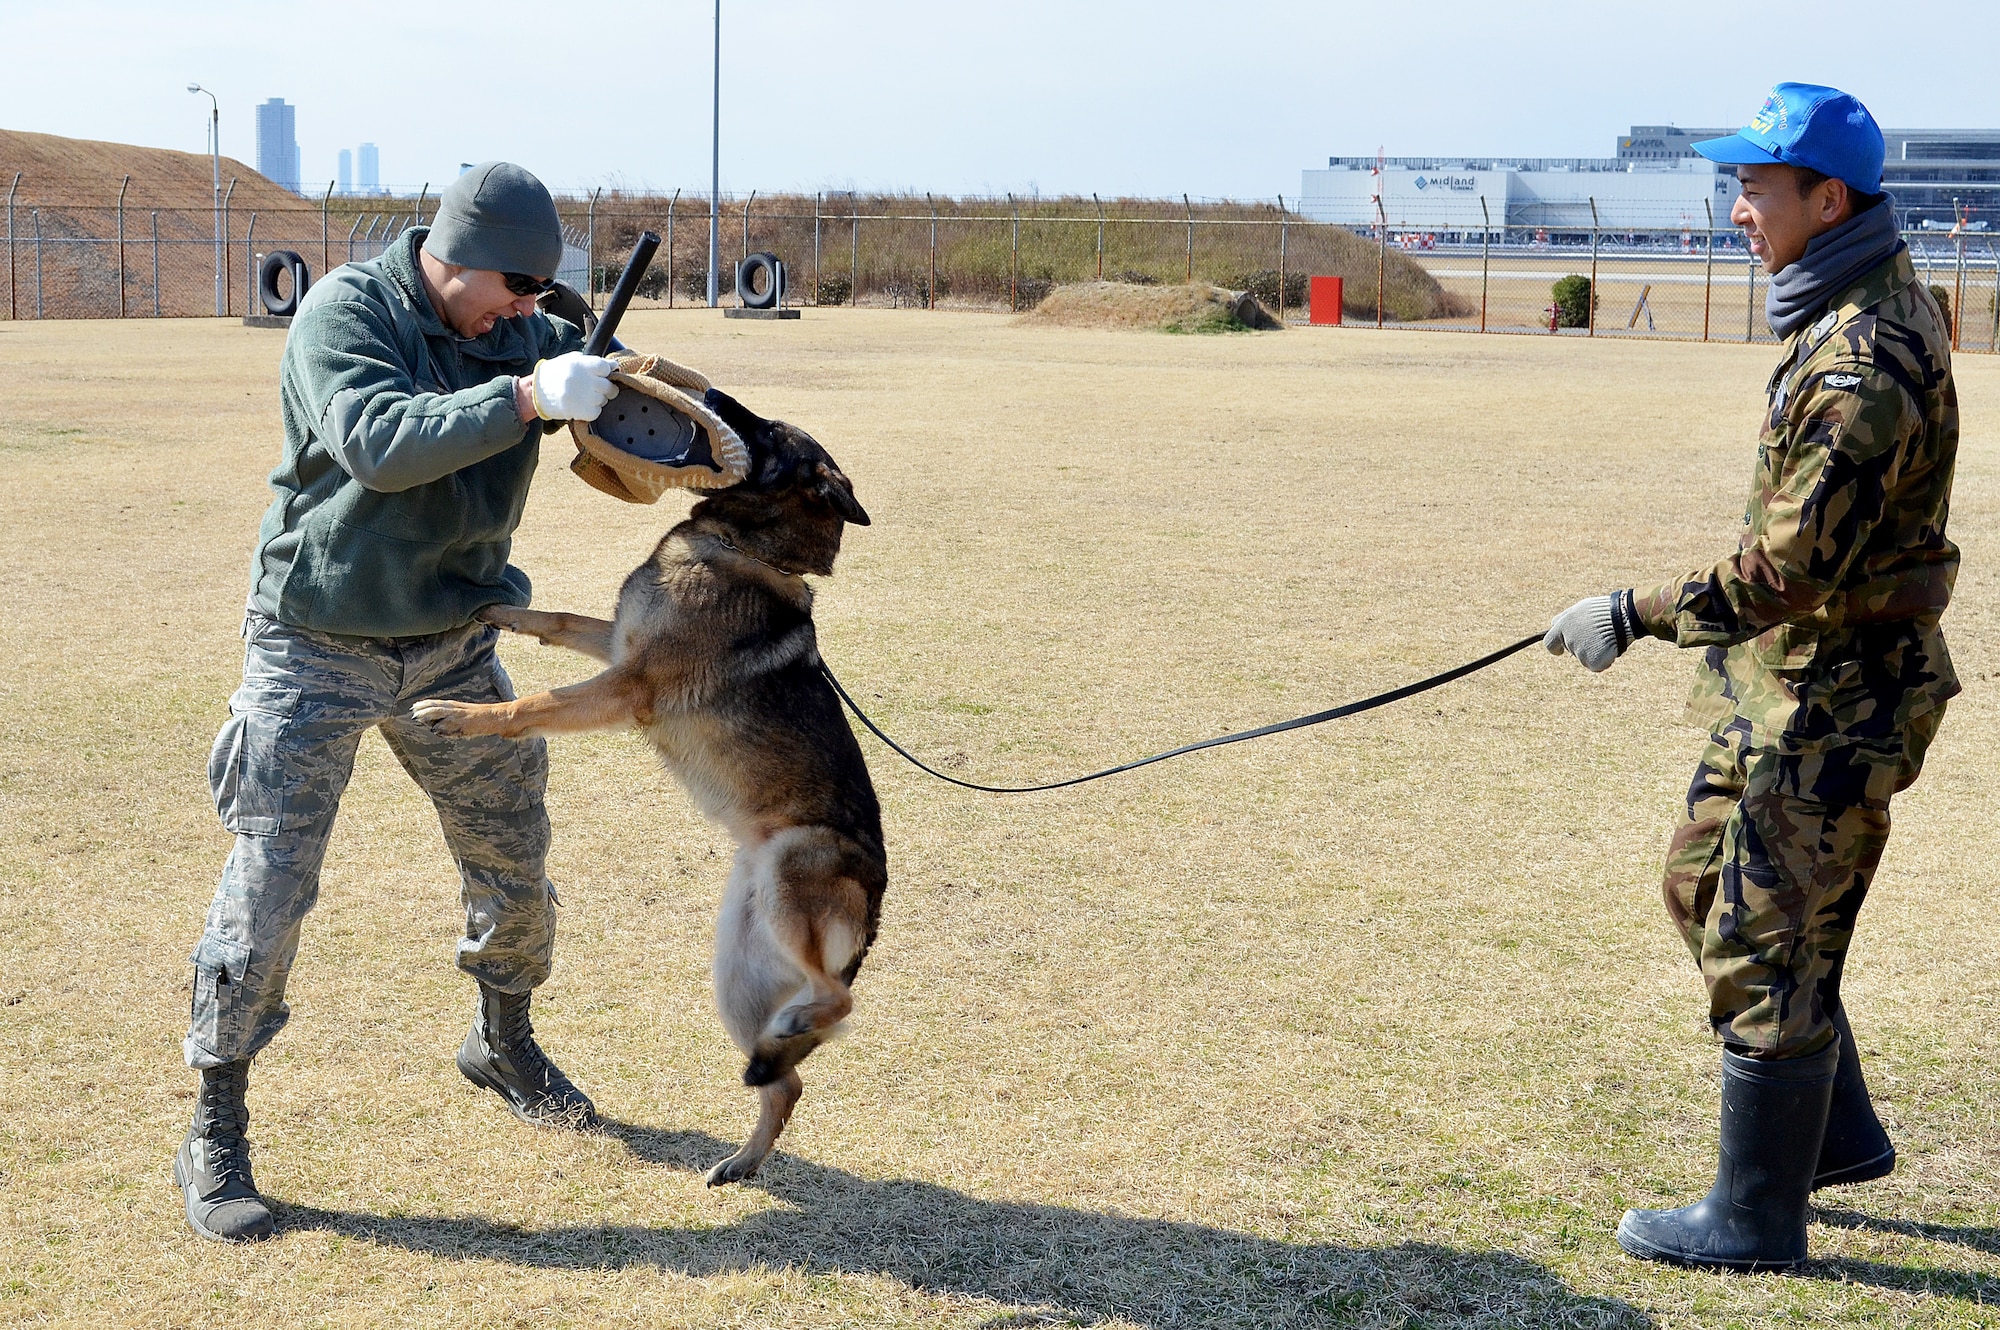 Staff Sgt. Jacob Hay, 374th Logistics Readiness Squadron vehicle operator, experiences dog handling training with members of Japanese Air Self Defense Force Security Forces as part of an exchange program at Komaki Air Base, Japan, March 7, 2015.  During the exchange eight Non-Commissioned Officers from Yokota Air Base, Japan, traveled to Komaki to experience how their JASDF counterparts conduct their mission and to learn more about the Japanese culture.  (U.S. Air Force photo by Tech. Sgt. Christopher Marasky/Released)